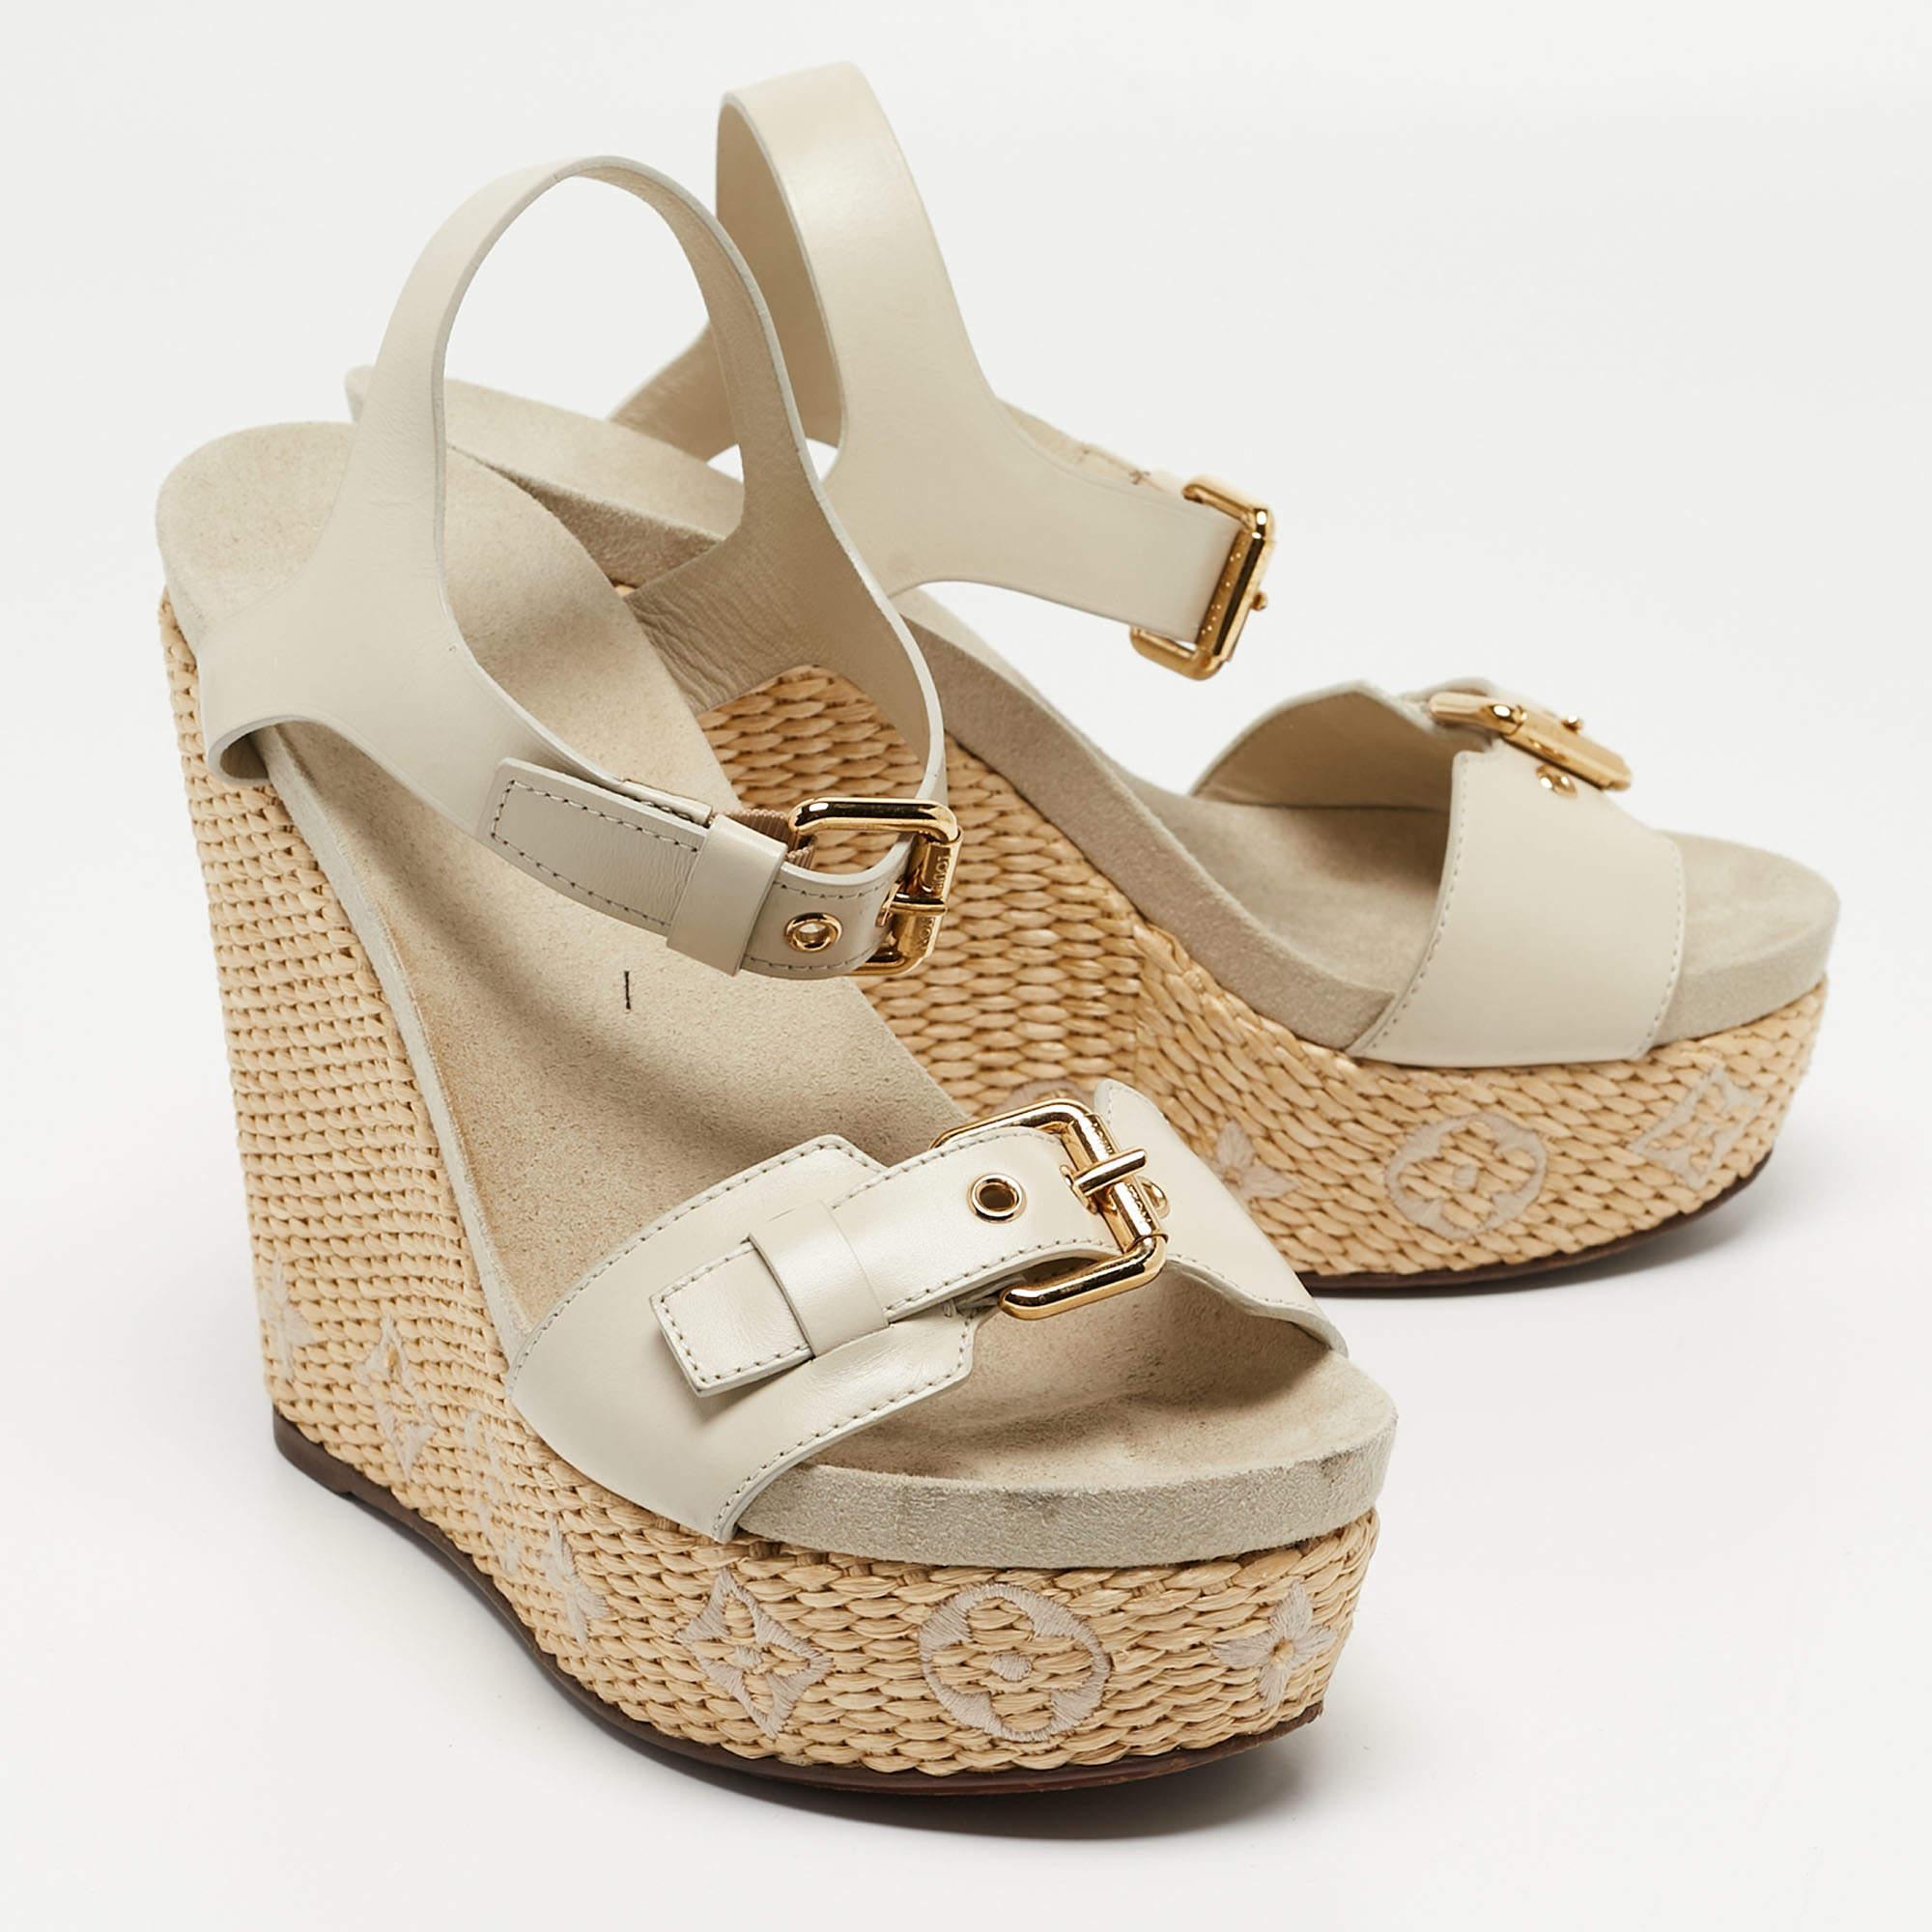 Louis Vuitton Cream Leather Buckle Detail Wedge Ankle Strap Sandals Size 39 1